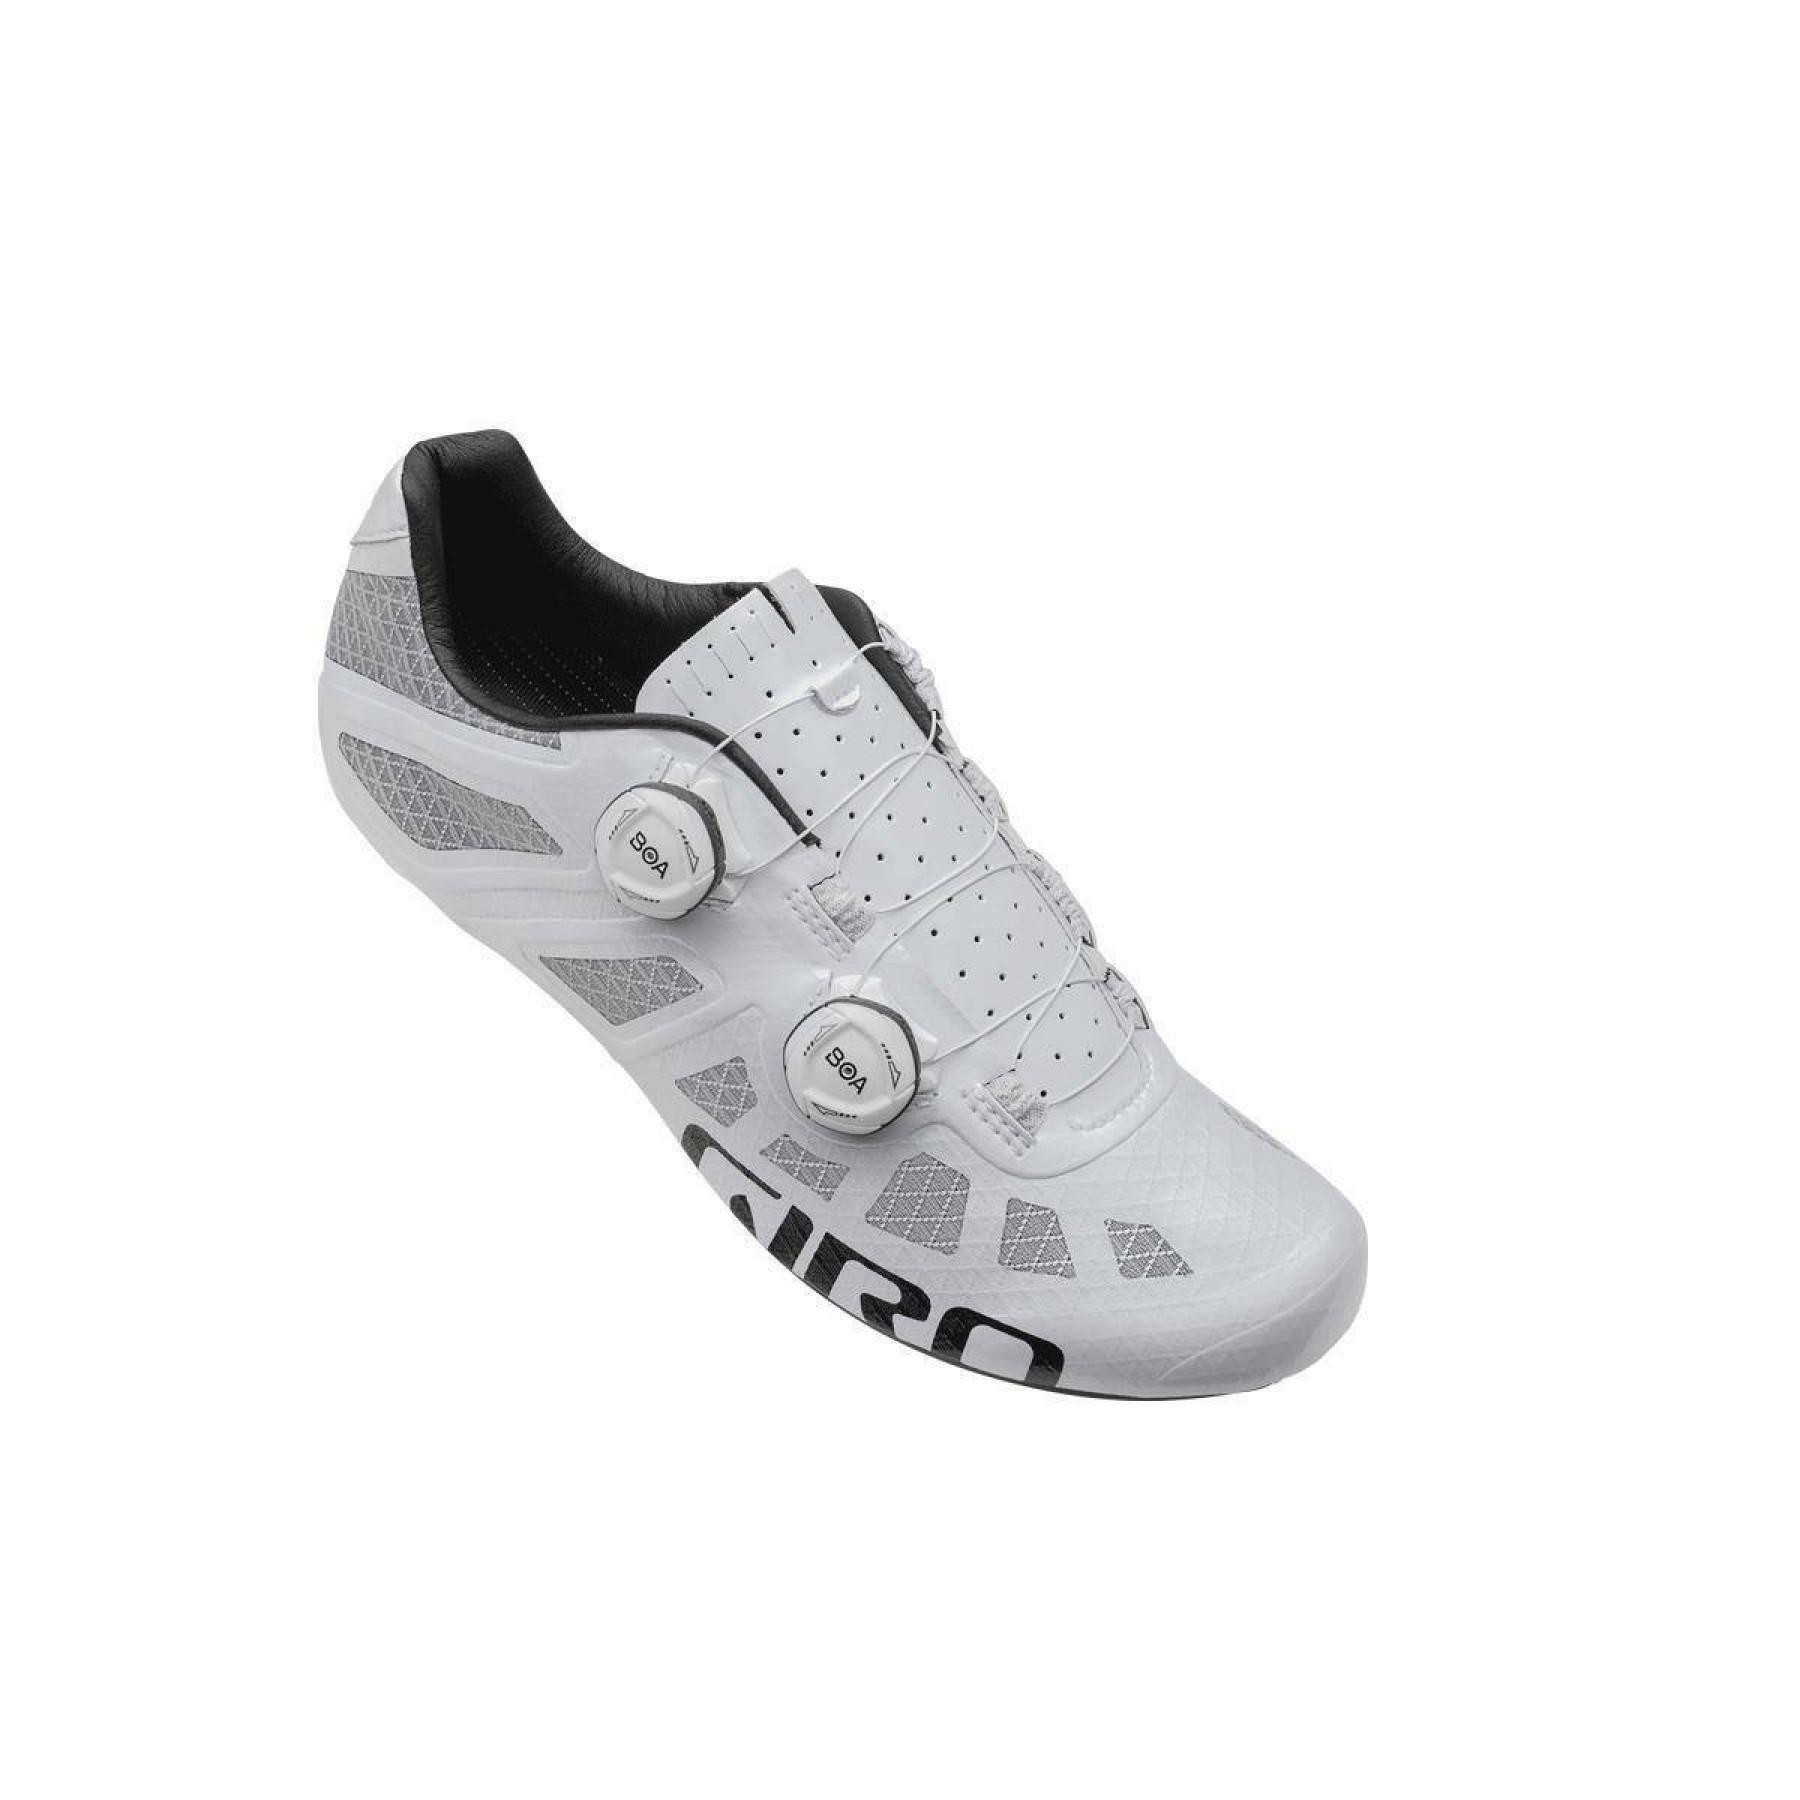 Chaussures Giro Imperial